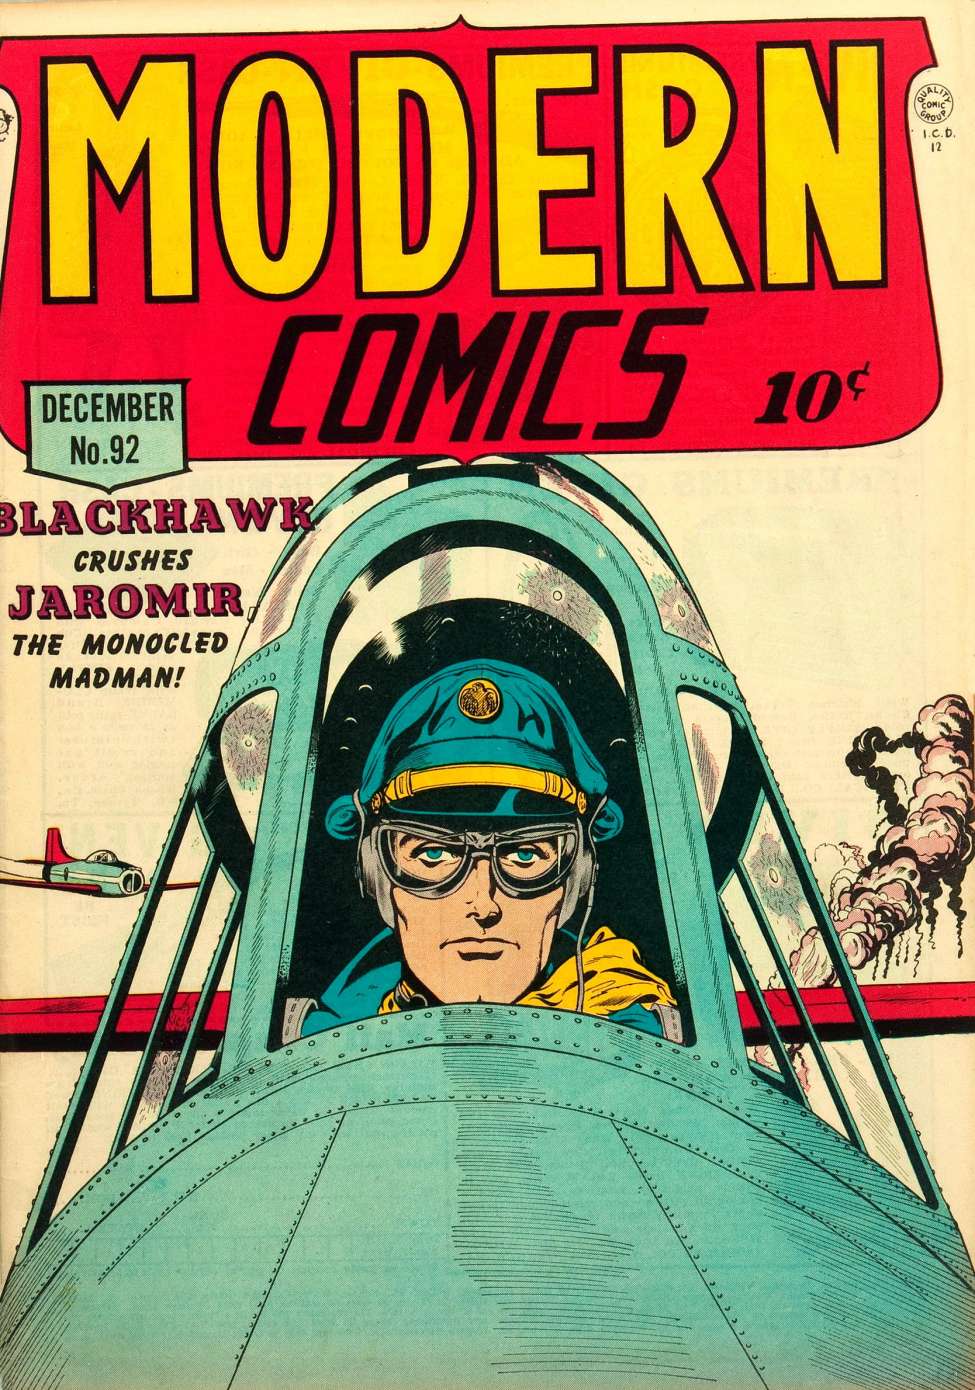 Book Cover For Modern Comics 92